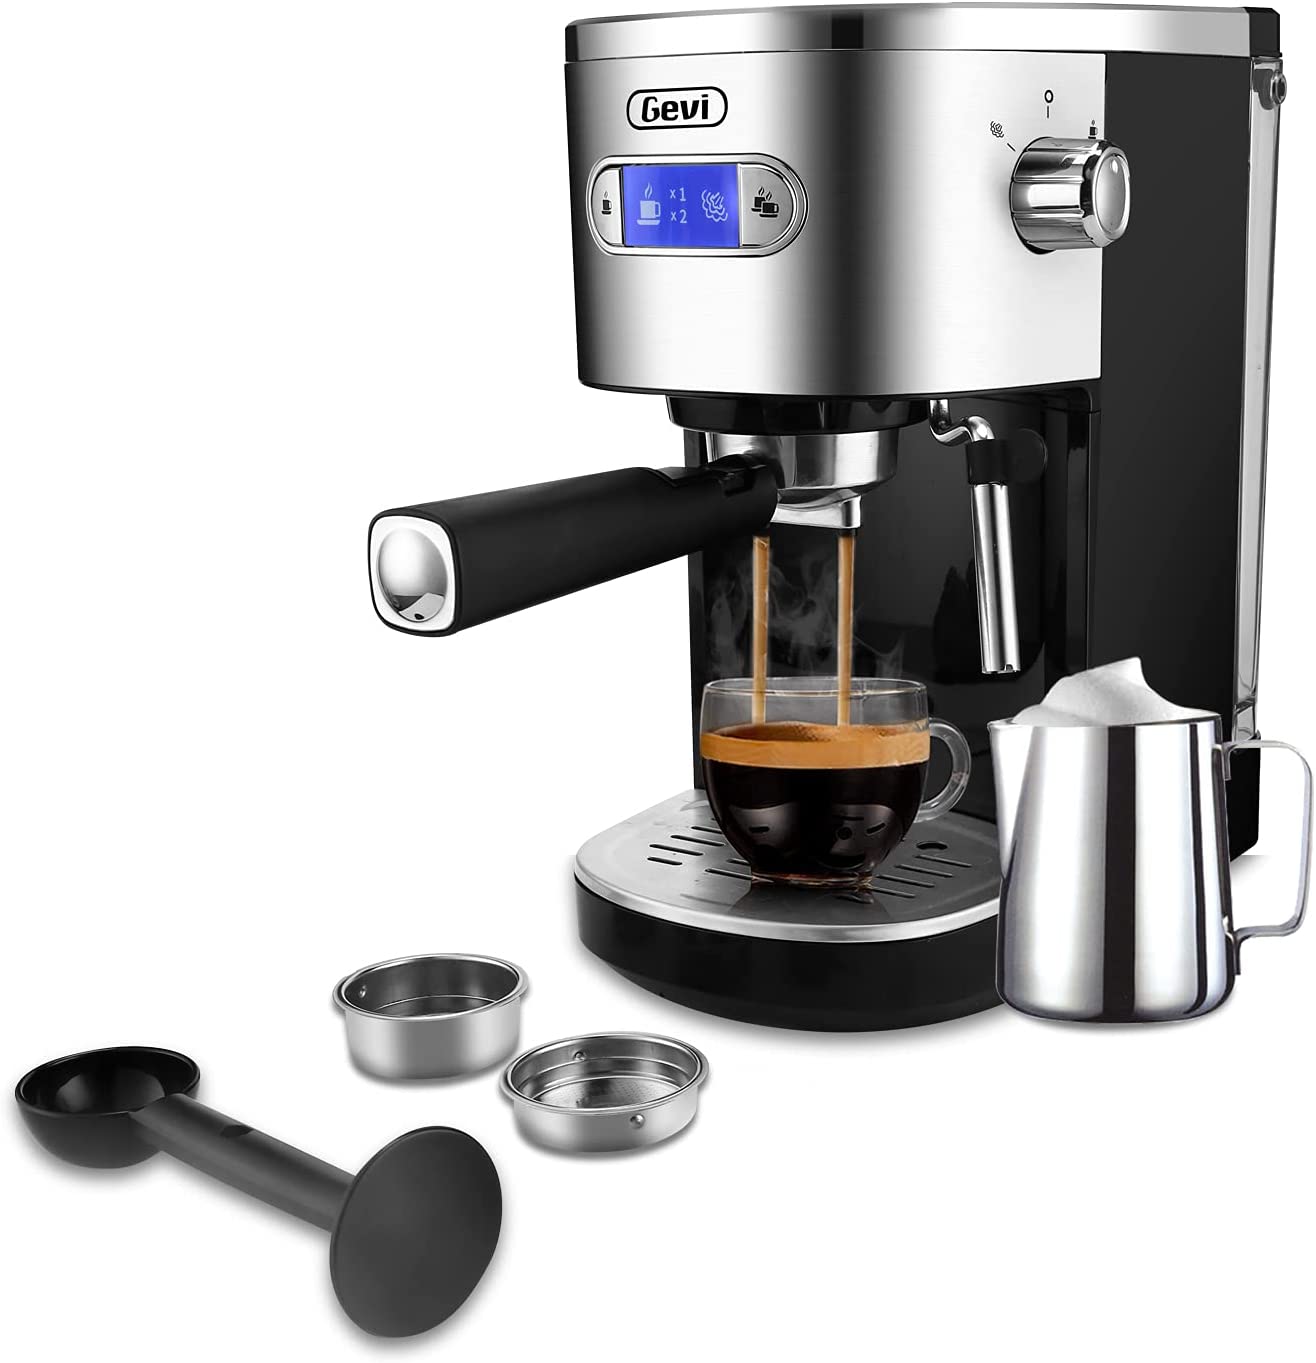 Gevi Espresso and Cappuccino Maker with Milk Frother